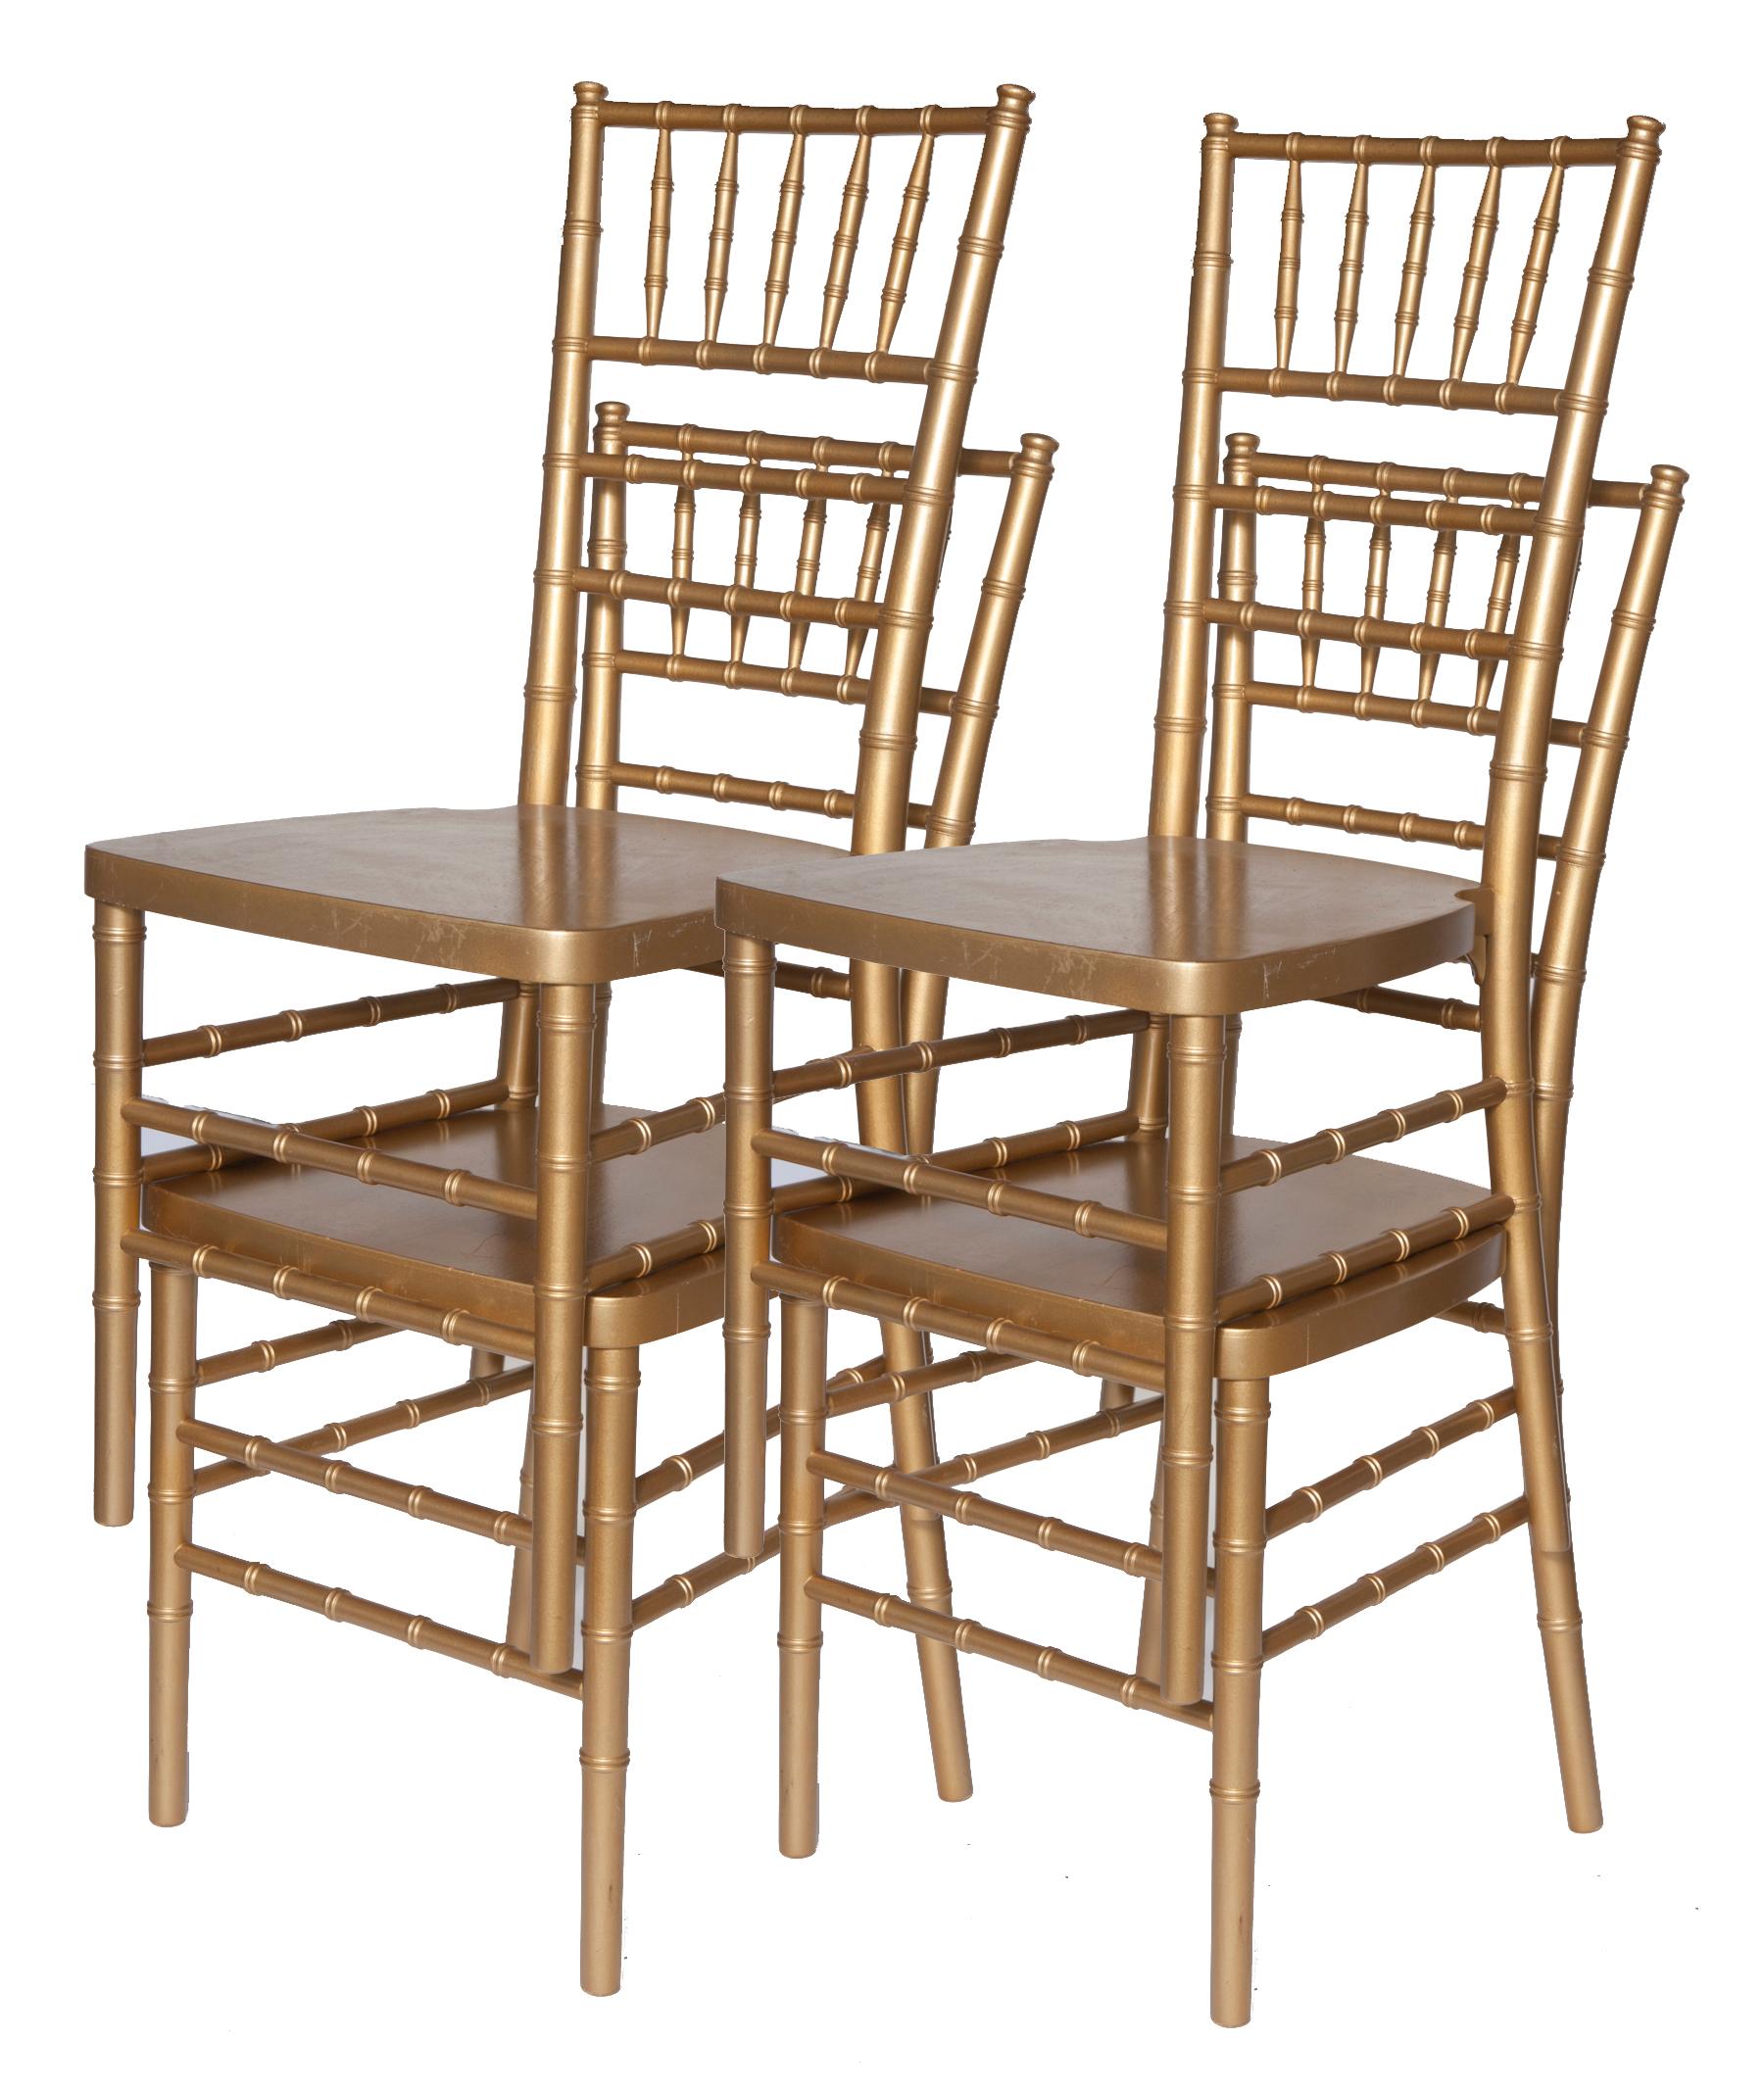 Stackable gold chairs with white seat cushions. Perfect for in or outdoor entertaining. Each chair measures 19